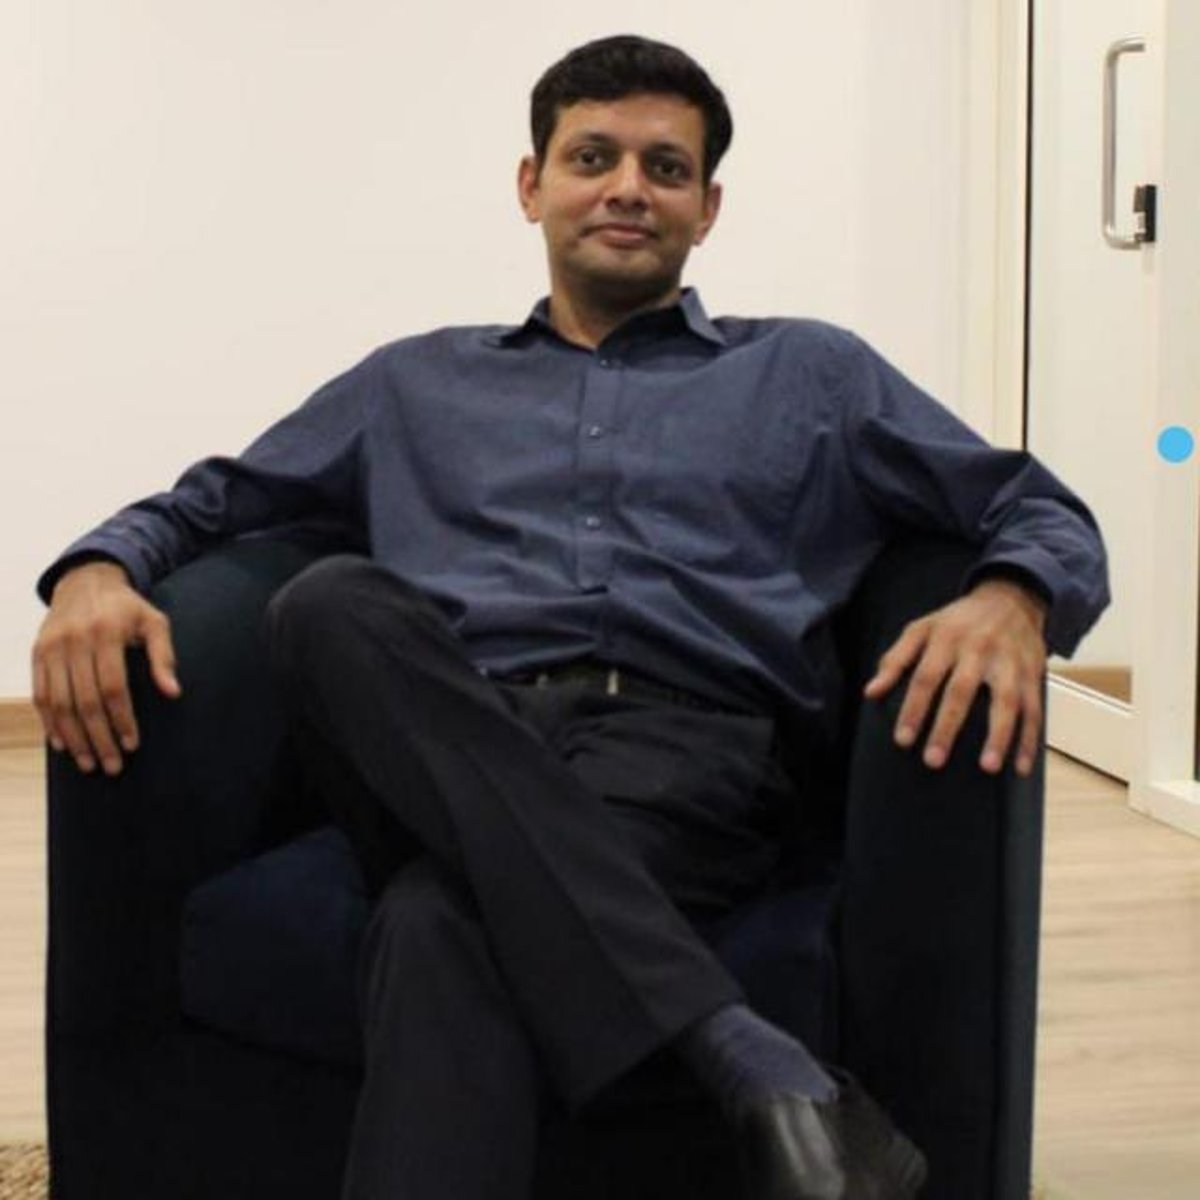 QpiAI Closes $6.5 Mill Pre-Series A Funding Led By Yournest And SIDBI Venture Capital To Enable Intelligence Modelling And Intelligence Compute Using Quantum Computers